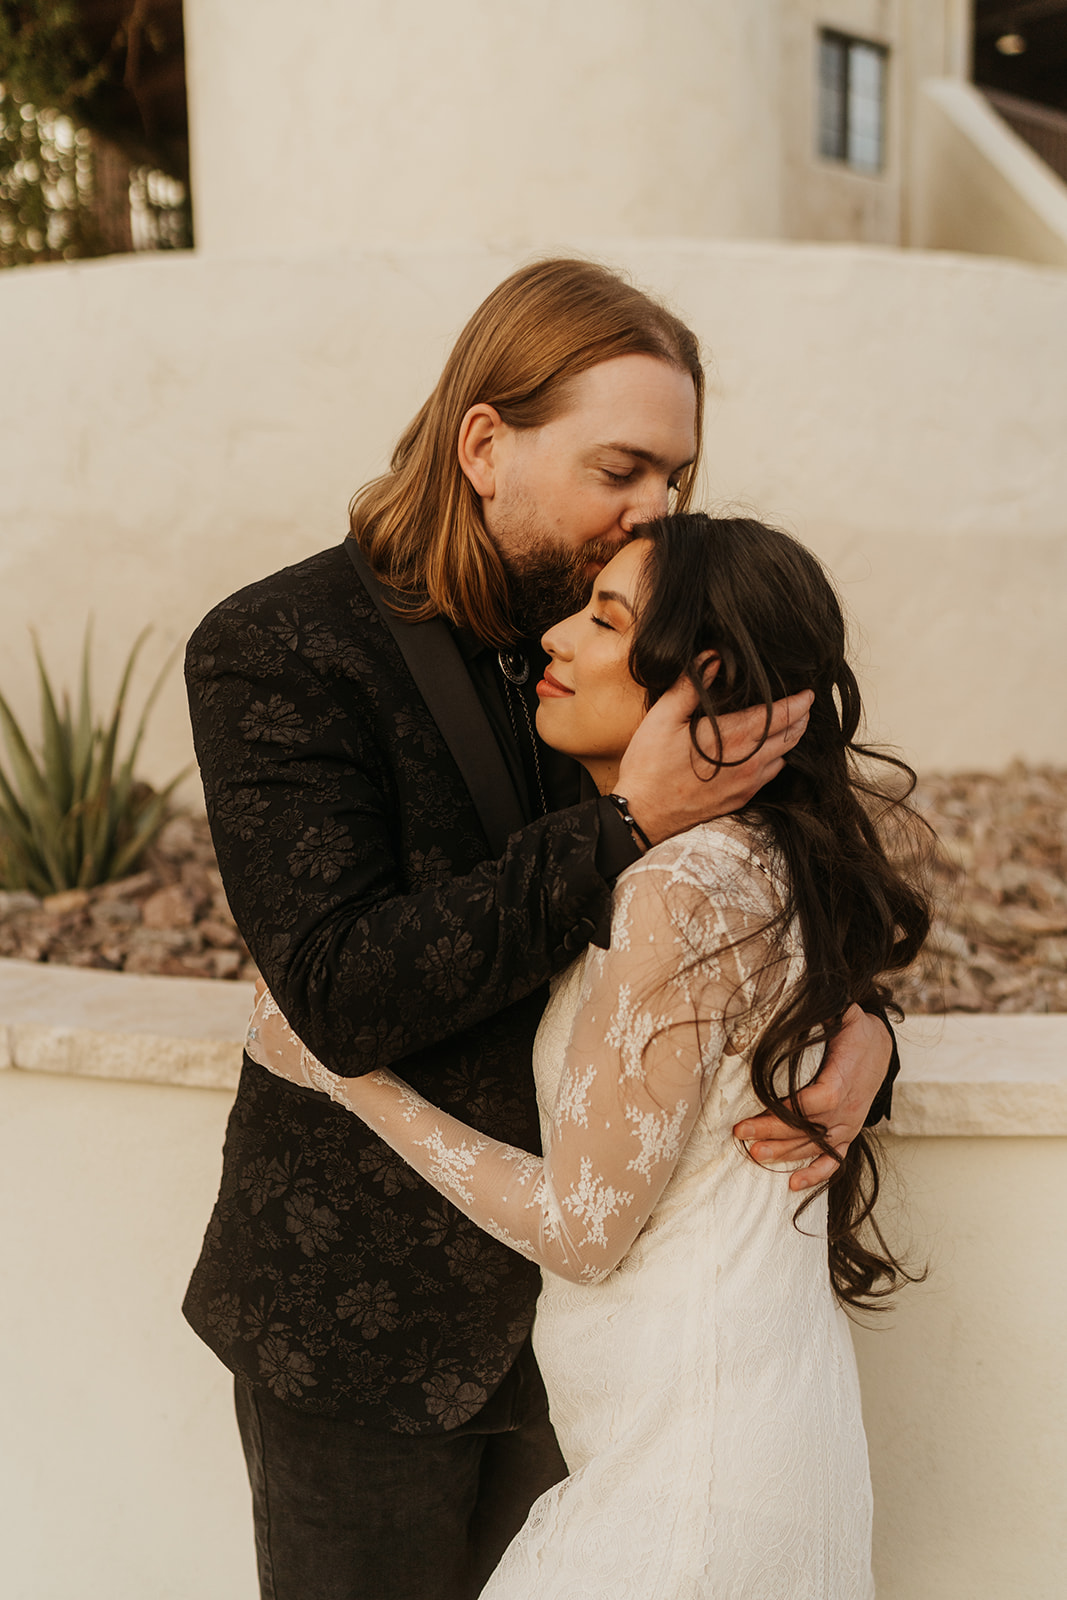 A tall man with red shoulder length hair and a shorter woman with long dark hair embrace, the man kisses the woman on the head.